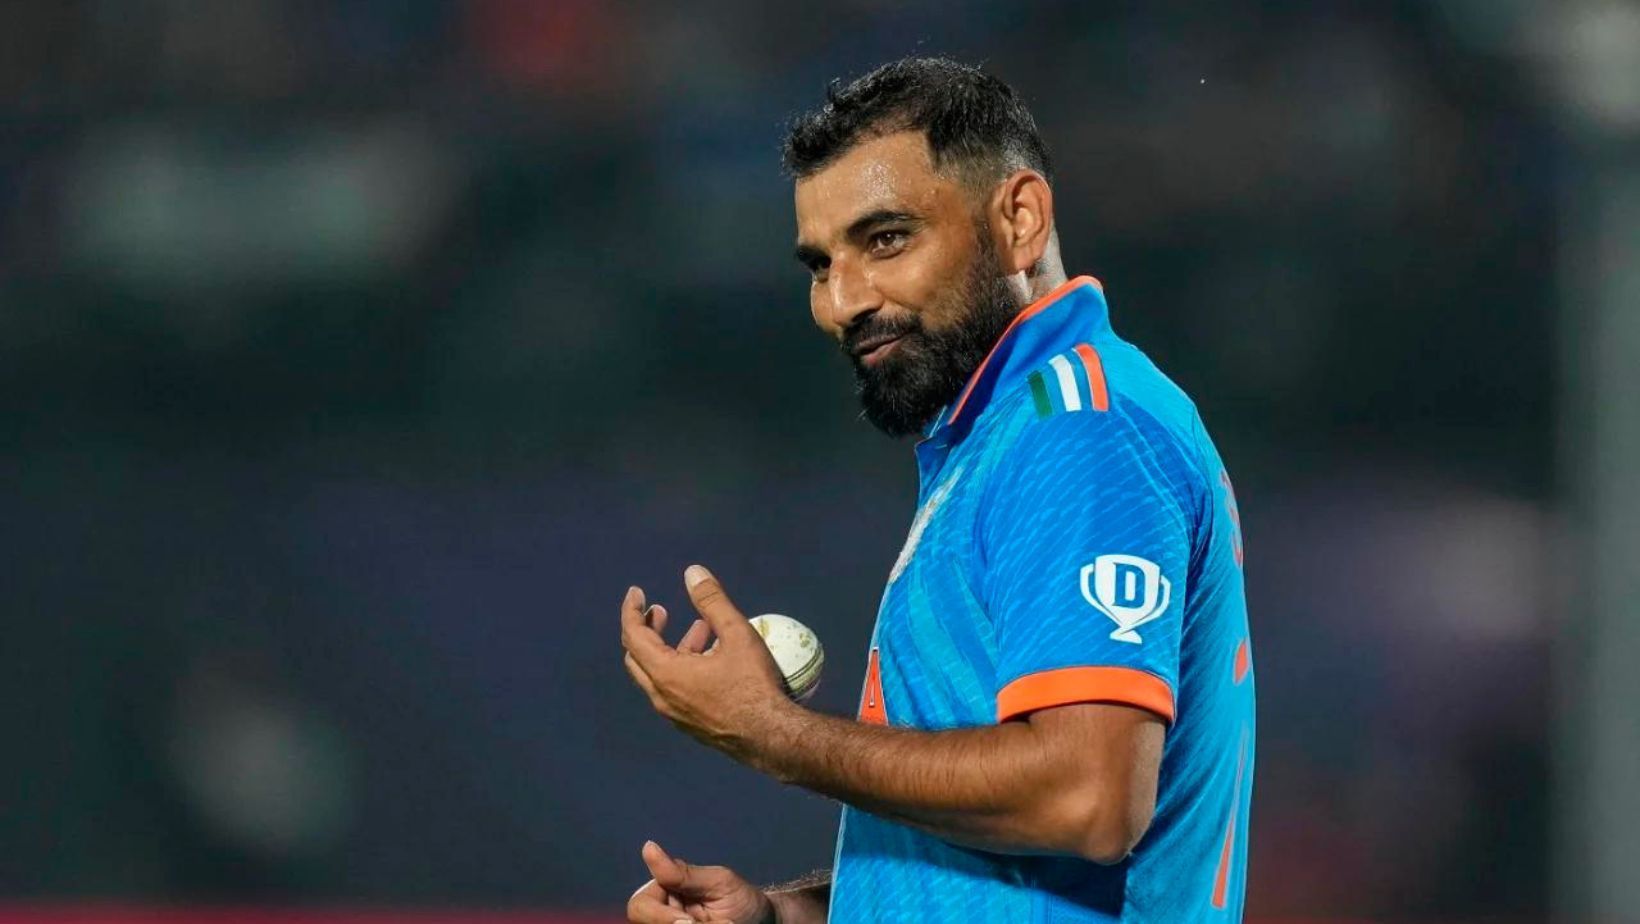 Mohammed Shami could be India